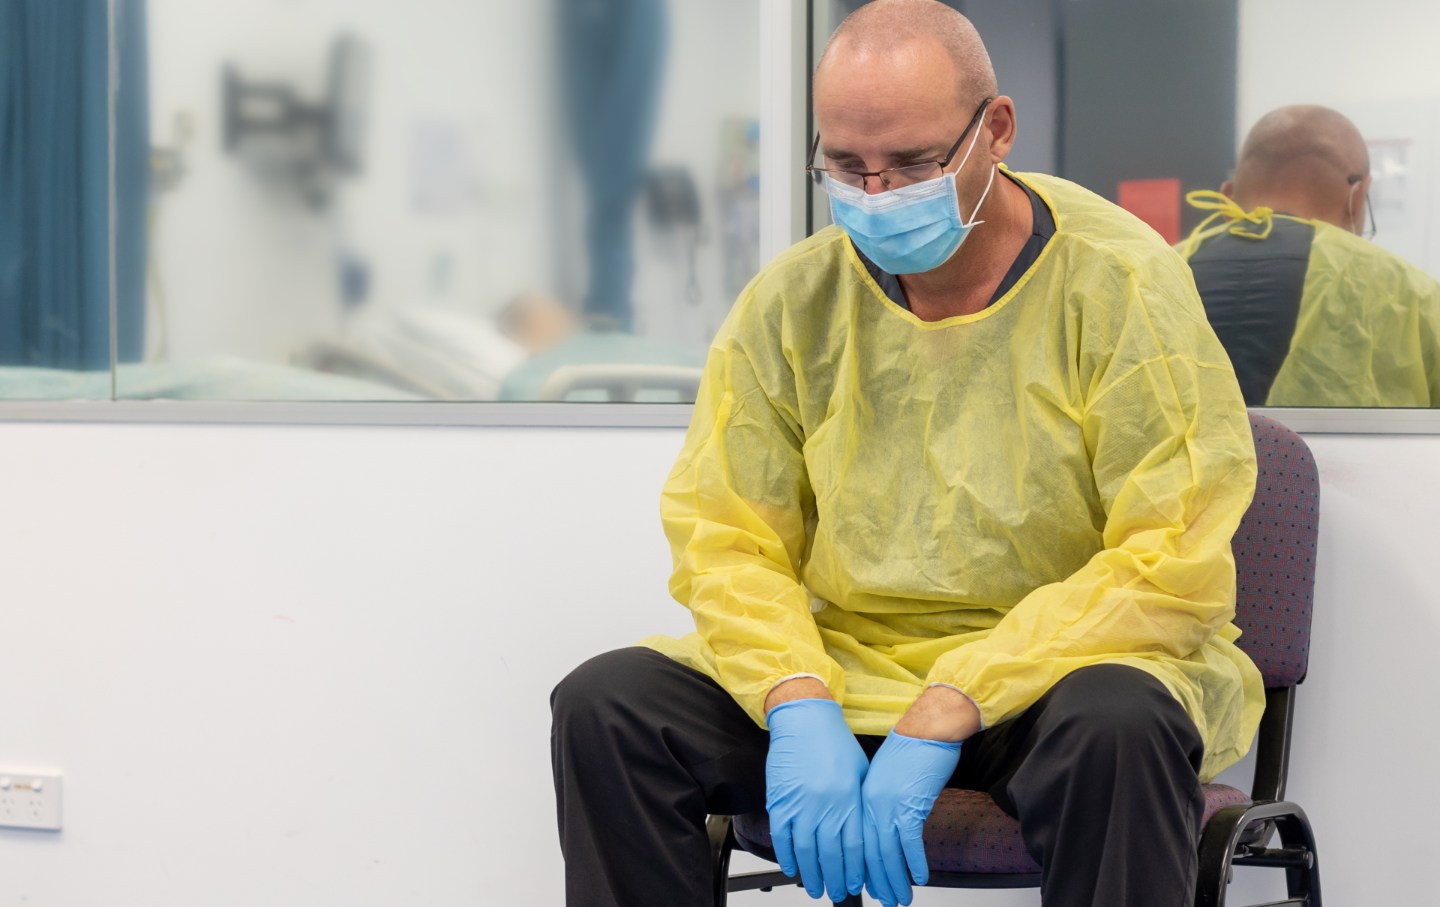 Close up of a Male Health care worker wearing protective equipment, mask, gown and gloves, sitting in a chair beside a closed hospital room looking exhausted.